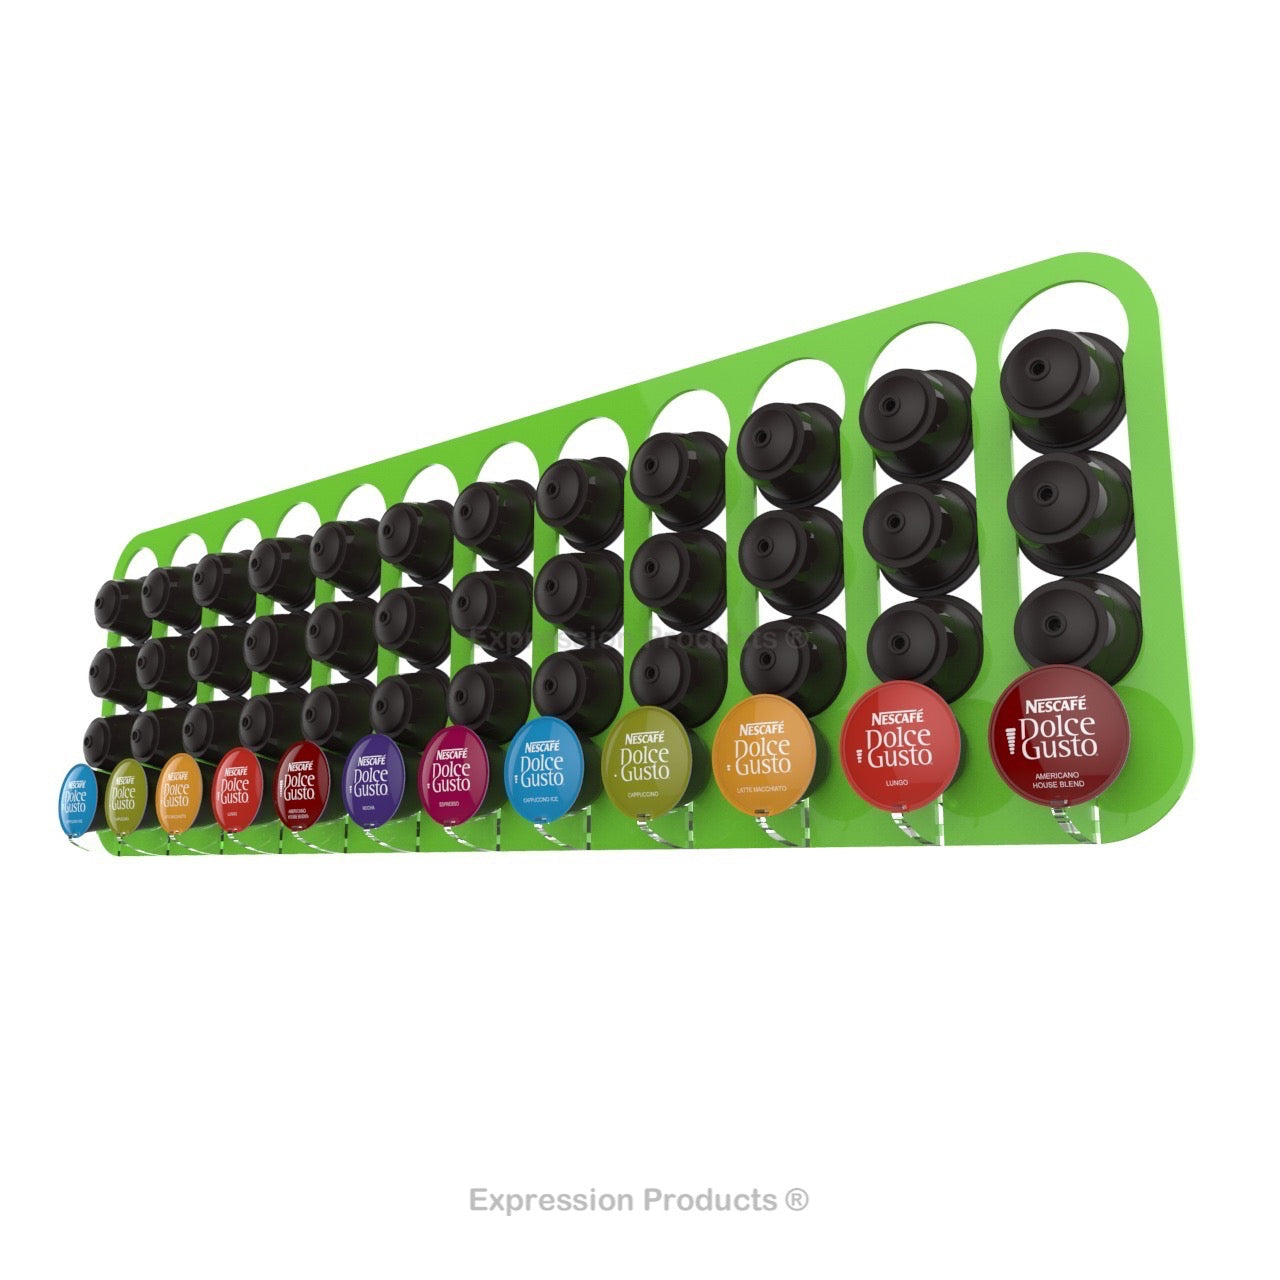 Dolce gusto coffee pod holder, wall mounted, half height.  Shown in lime holding 48 pods